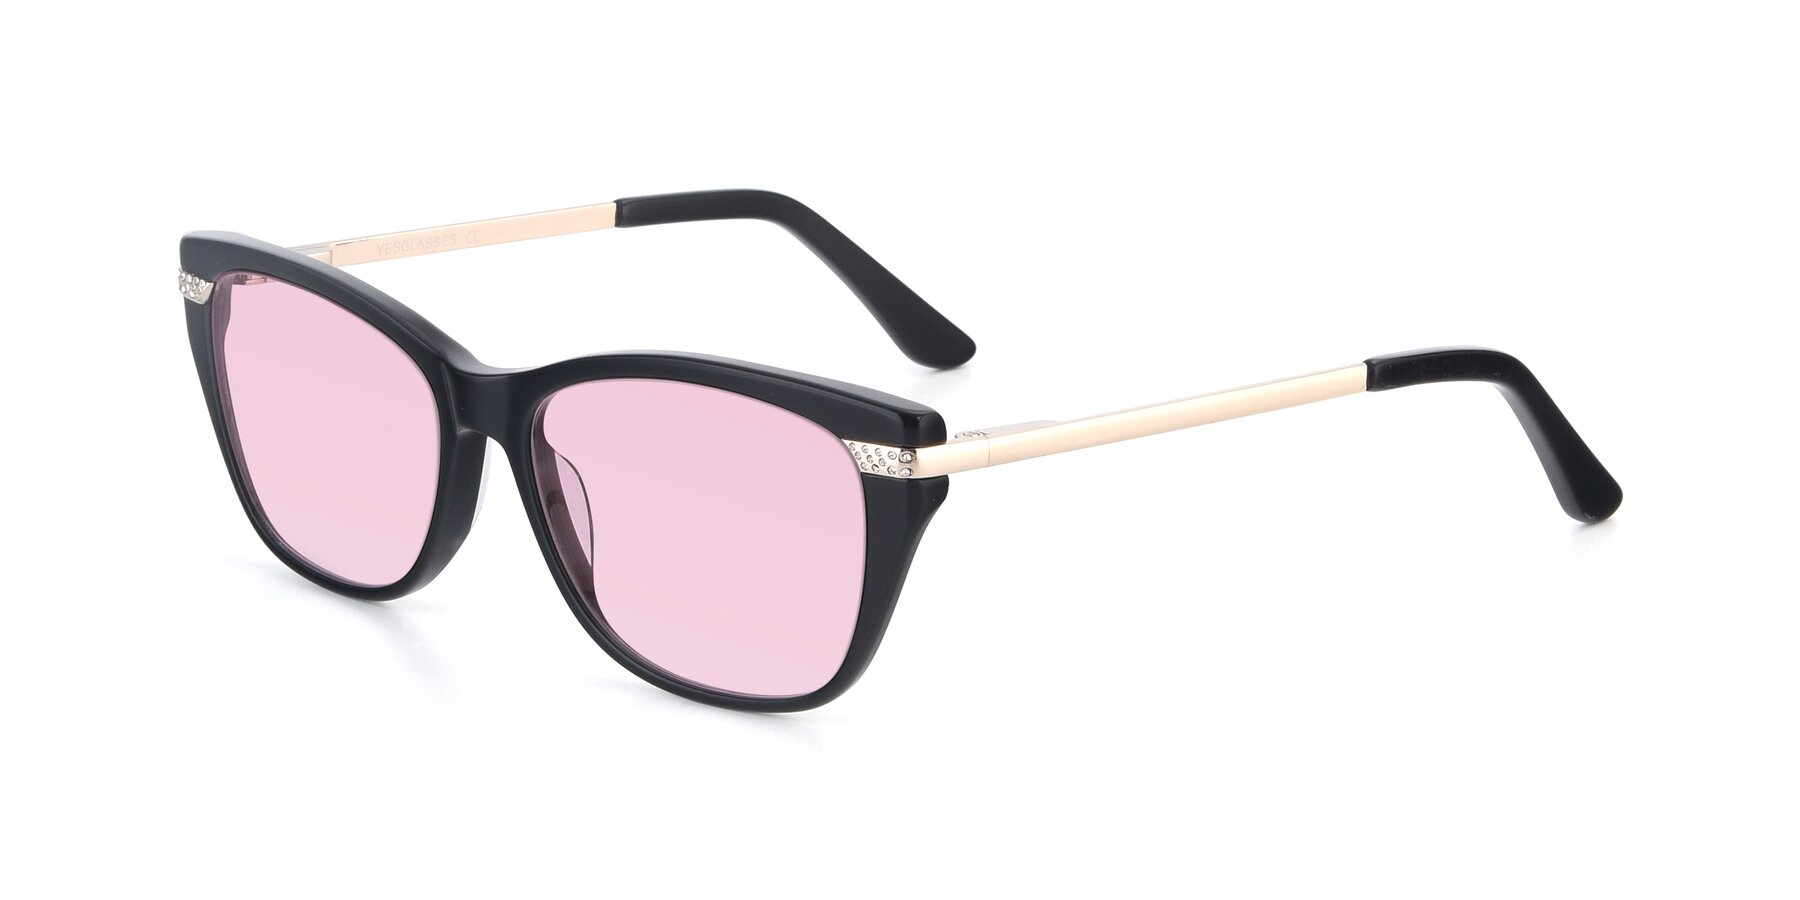 Angle of 17515 in Black with Light Pink Tinted Lenses